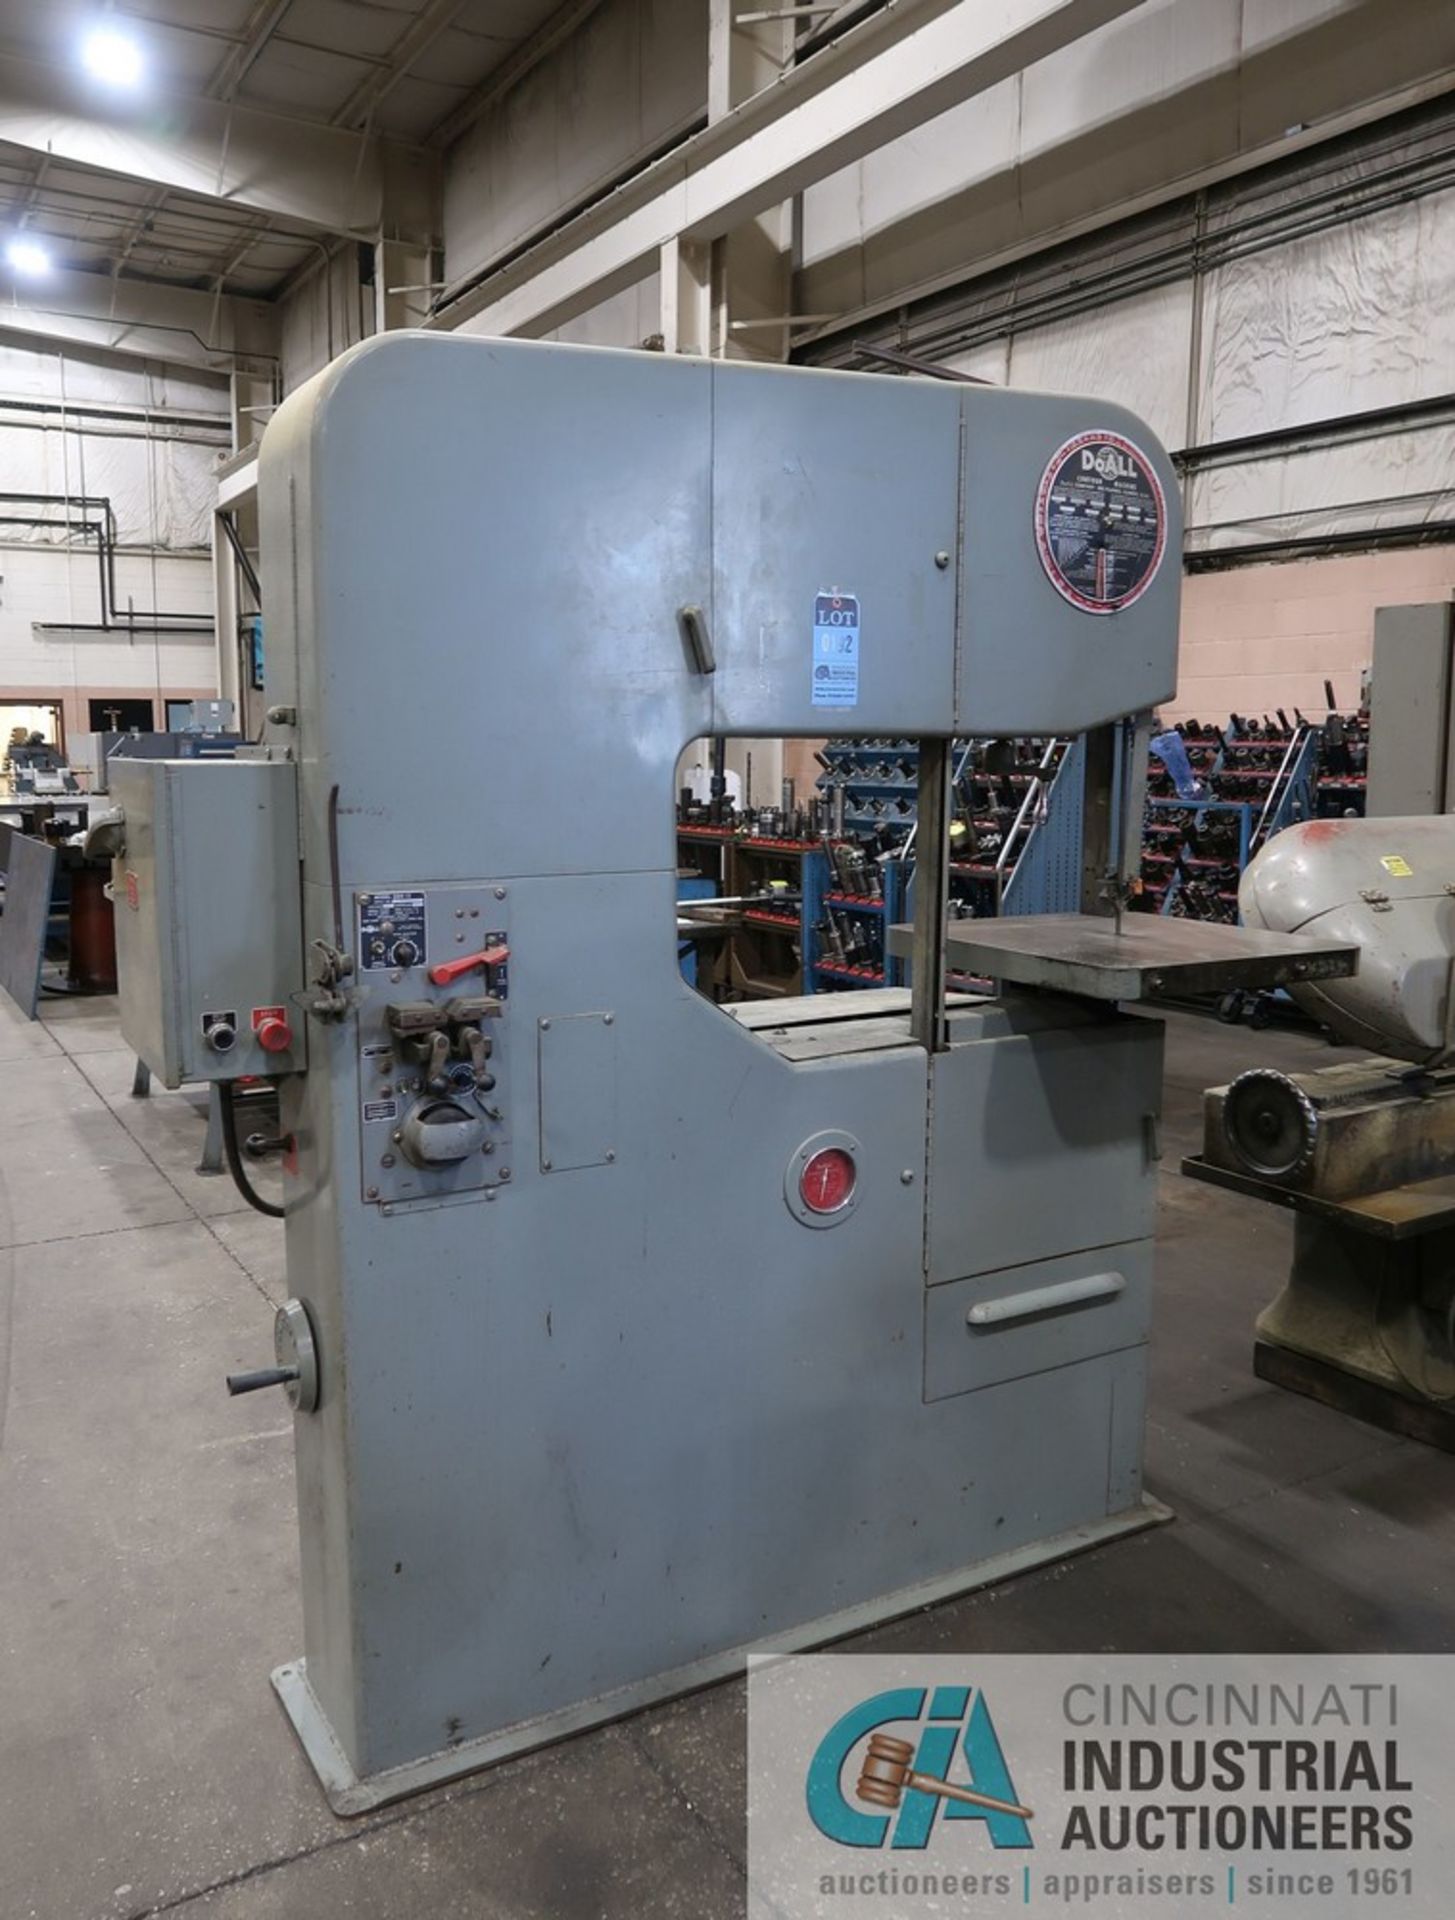 36" DOALL MODEL 3613-0 VERTICAL BANDSAW; S/N 278-73422, WITH BLADE WELDER, 3-PHASE, 220 VOLTS